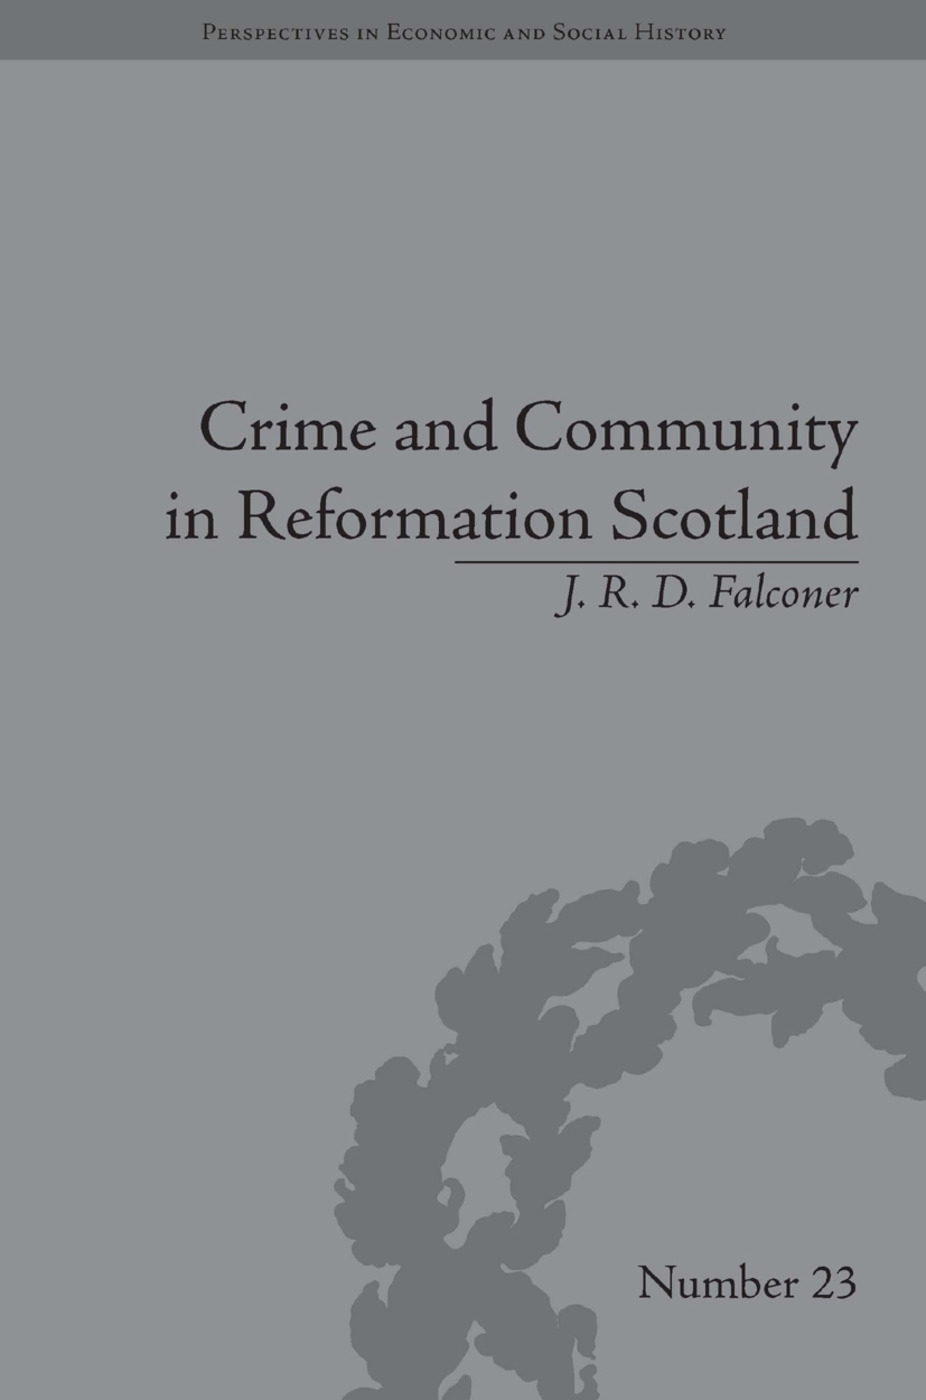 Crime and Community in Reformation Scotland: Negotiating Power in a Burgh Society